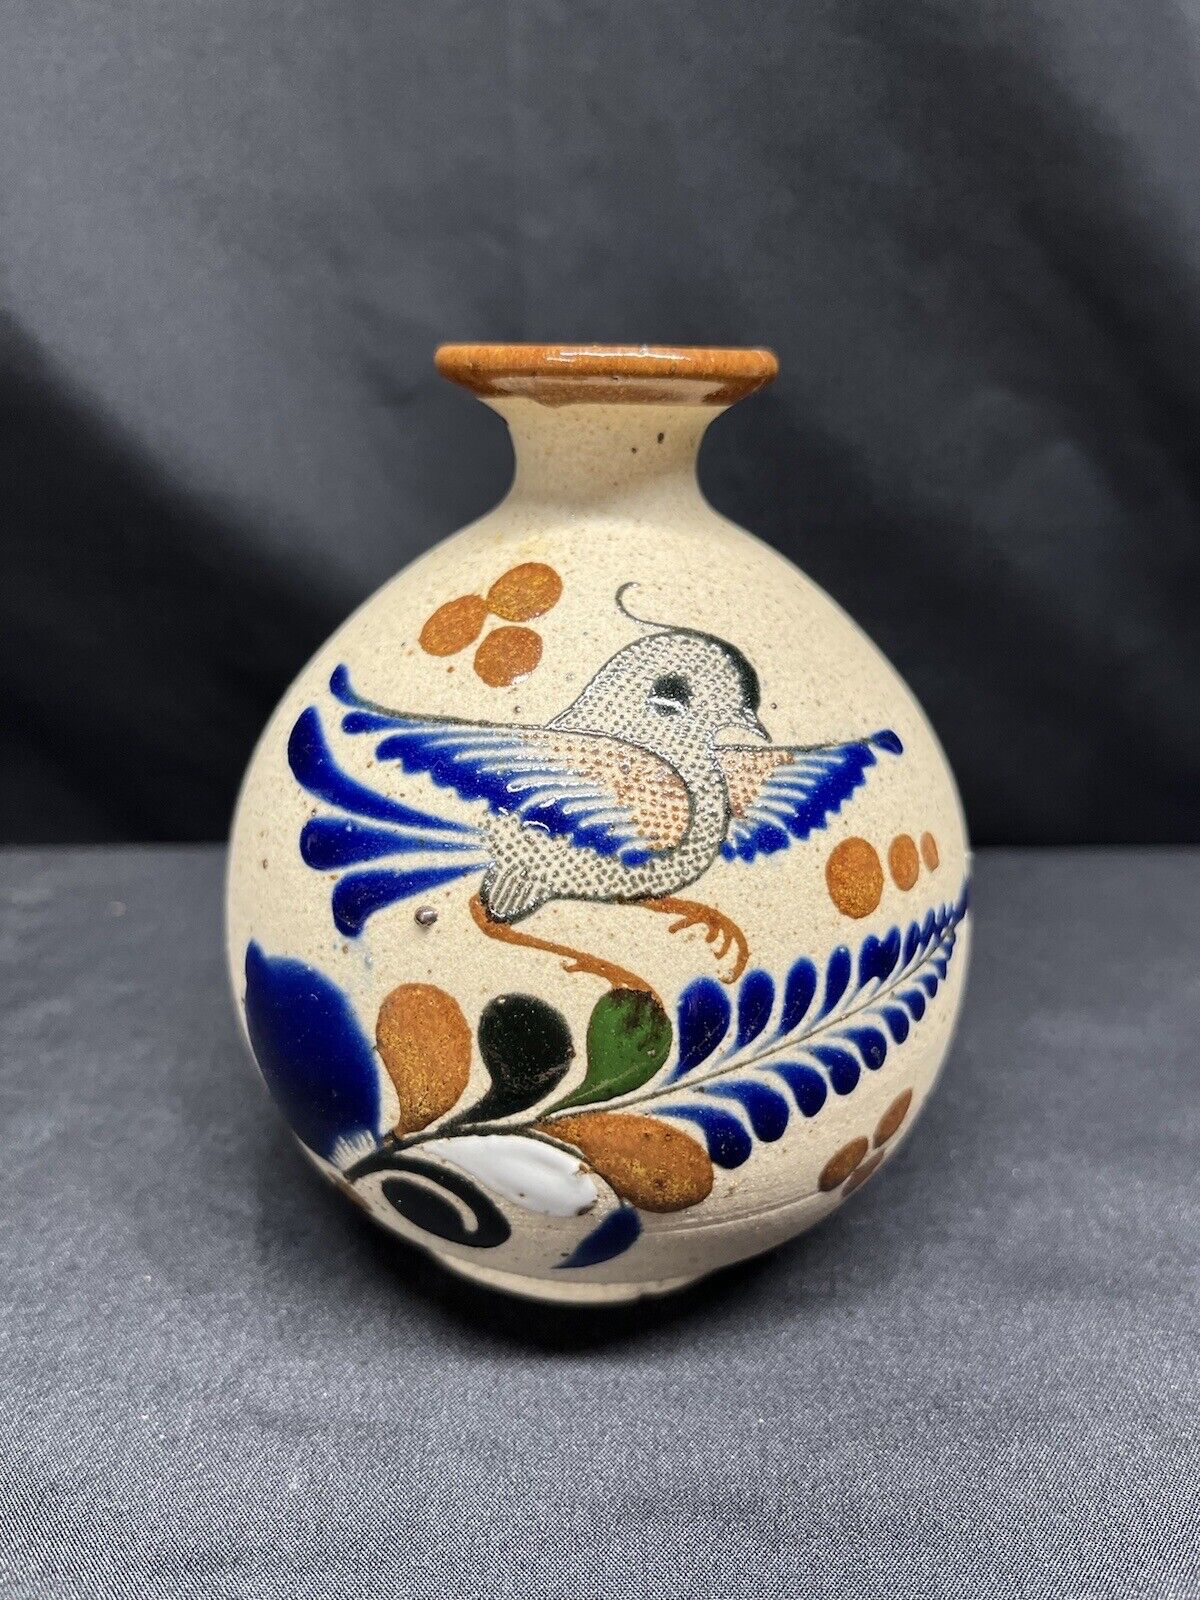 Vintage Tonal Mexican Pottery 5” Vase Bird With Fern Design Signed Mexico